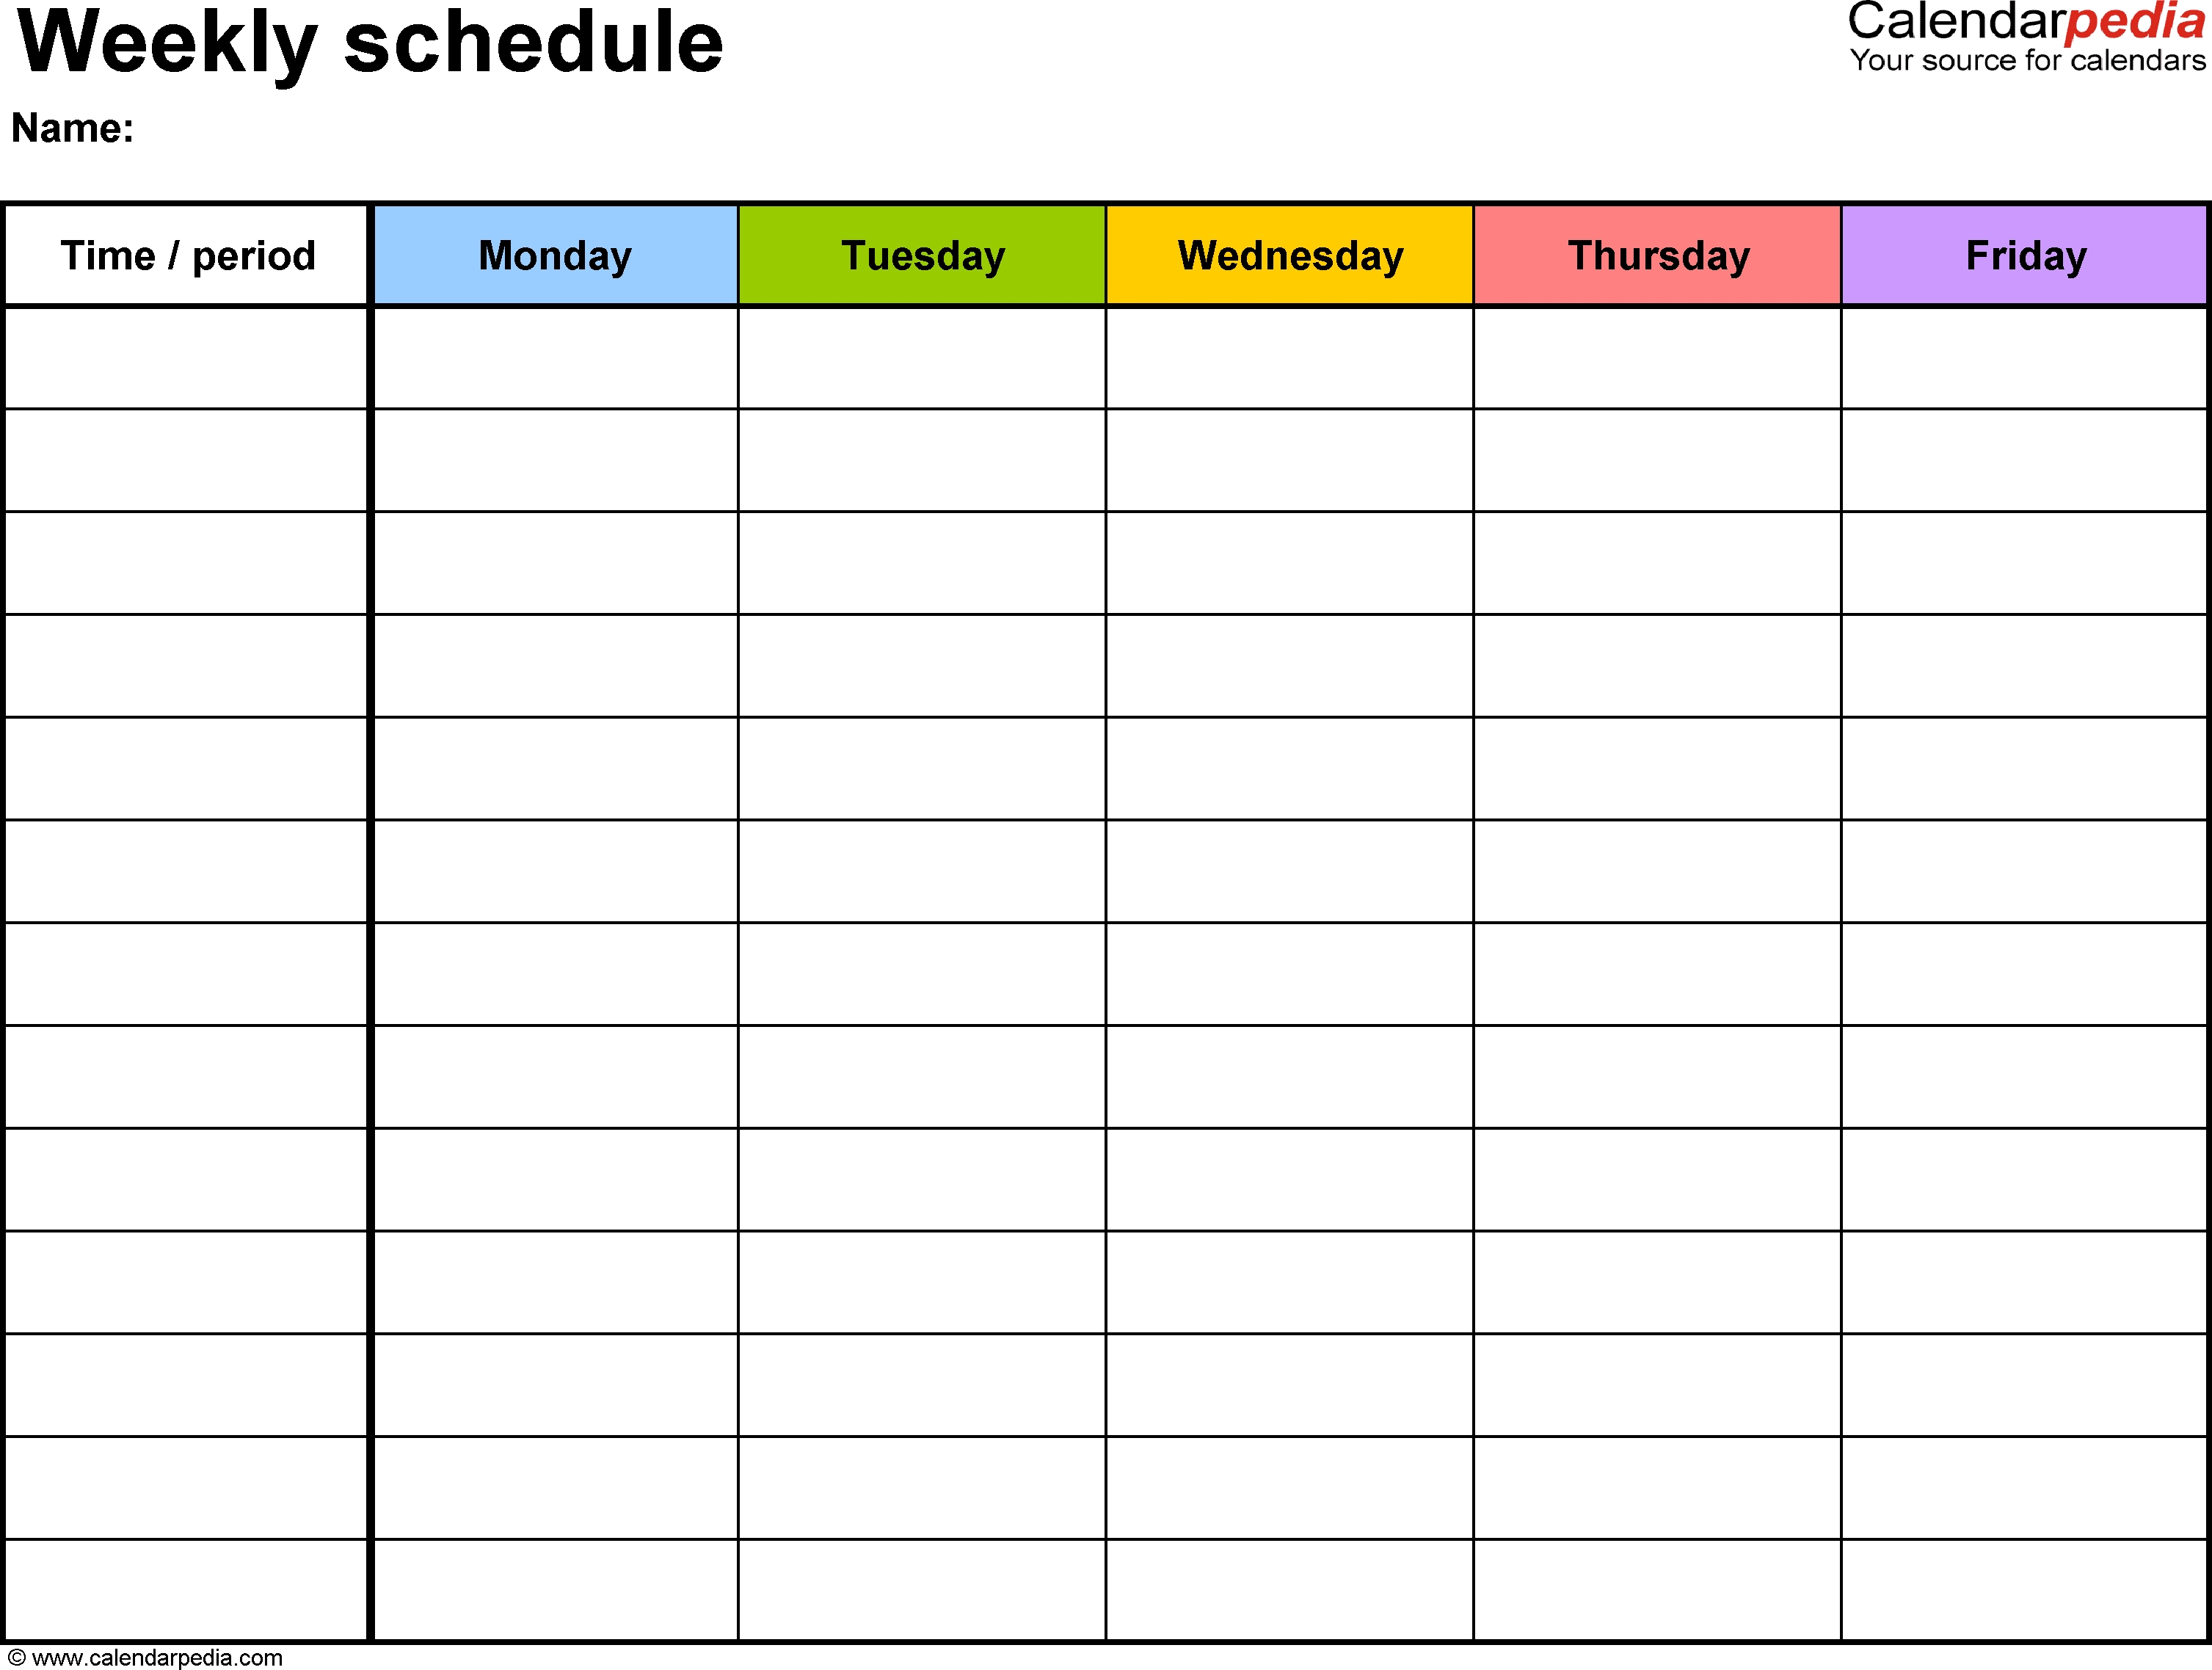 Free Weekly Schedule Templates For Word - 18 Templates  Printable Blank Weekly Employee Schedule